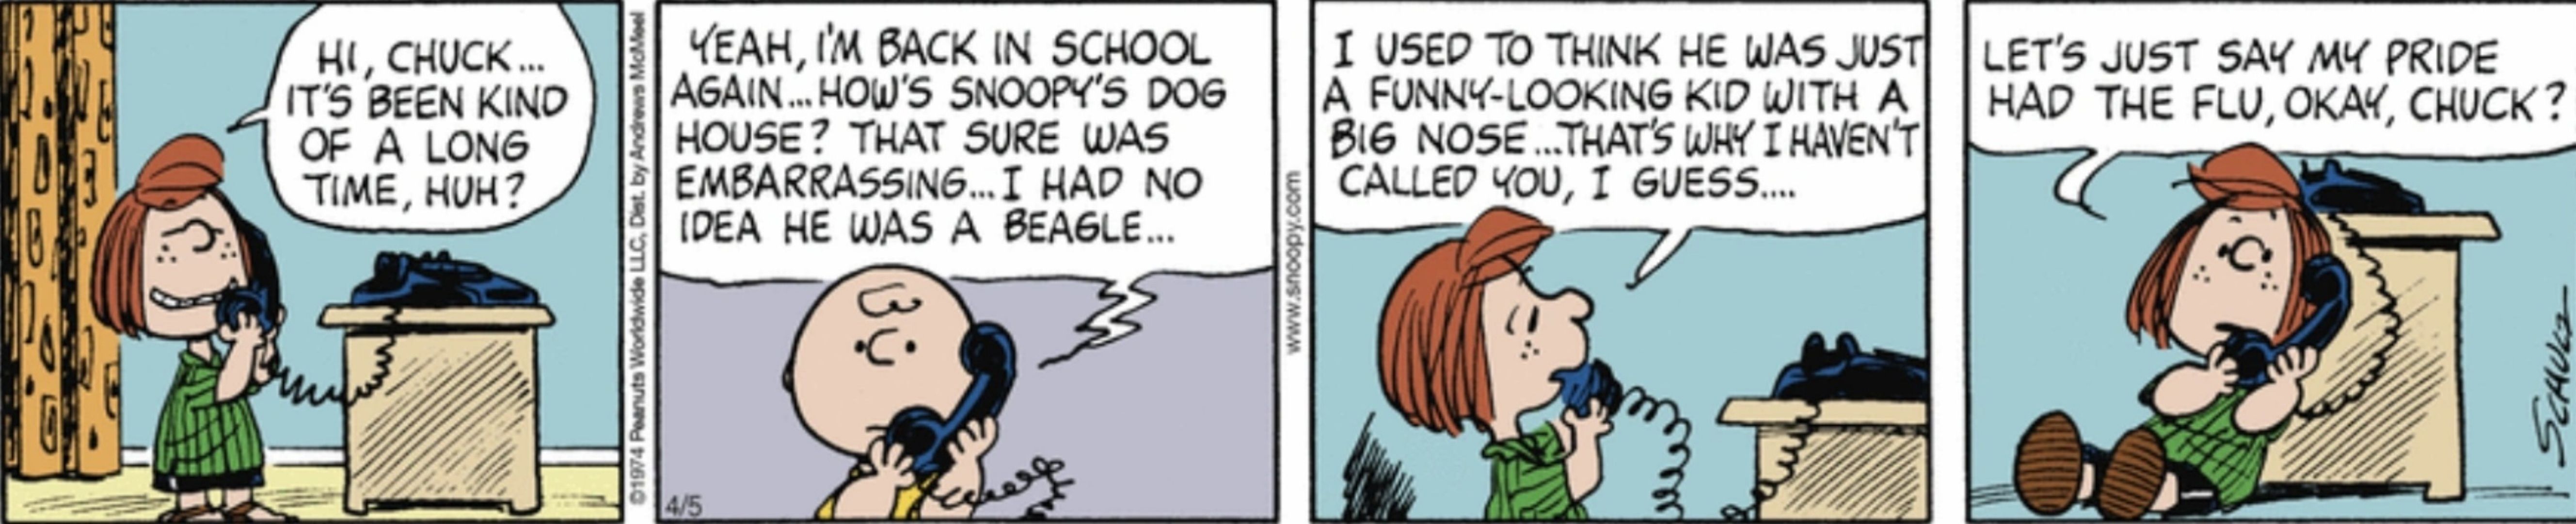 Peppermint Patty and Charlie Brown on the phone in Peanuts.